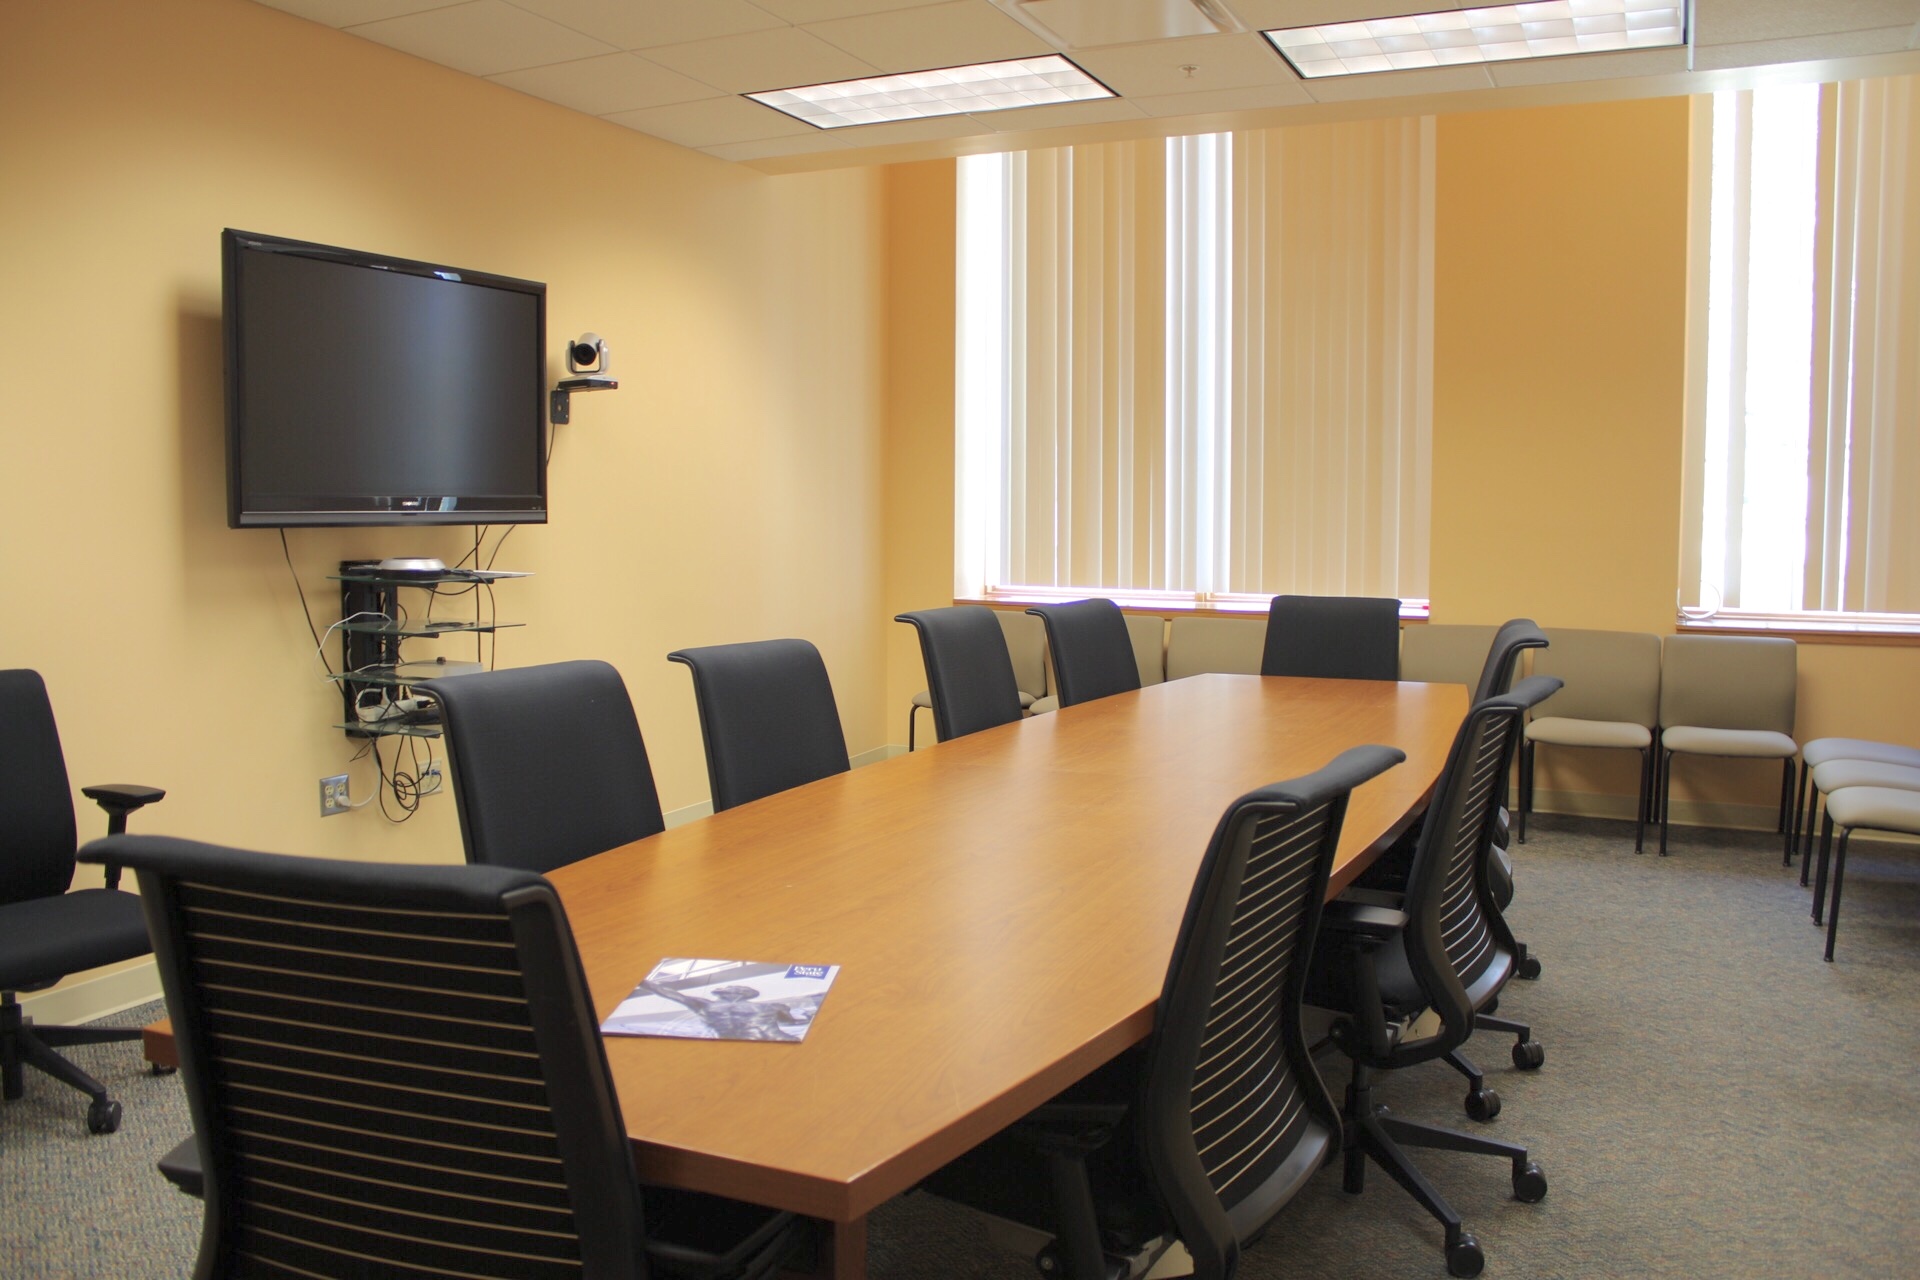 Hoyt Conference room showing table, chairs, wall mounted tv and webcam.